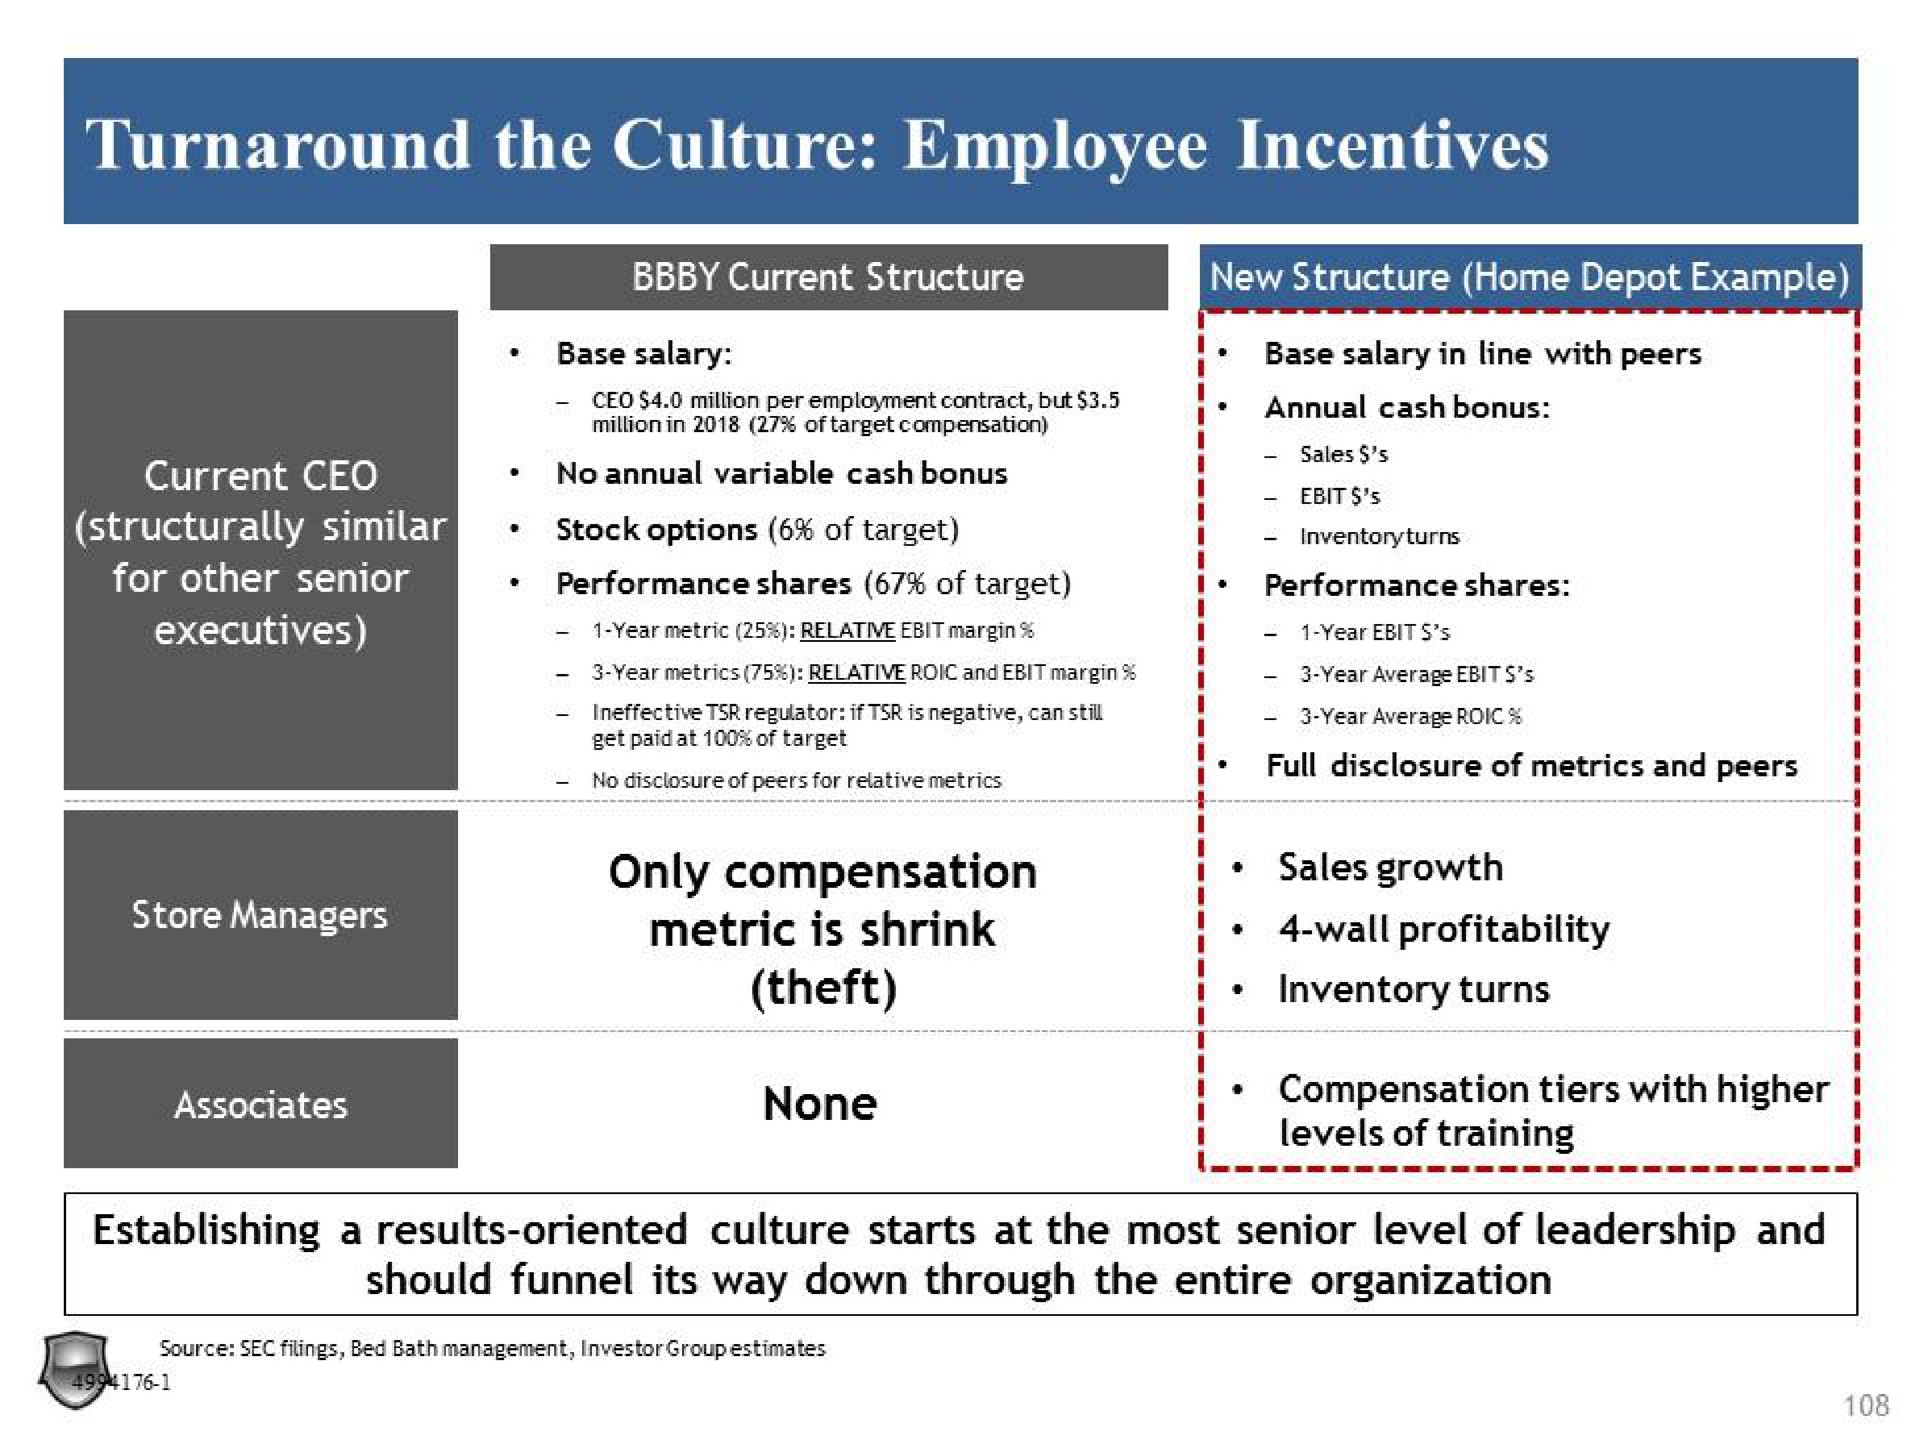 turnaround the culture employee incentives only compensation metric is shrink theft sales growth wall profitability inventory turns | Legion Partners